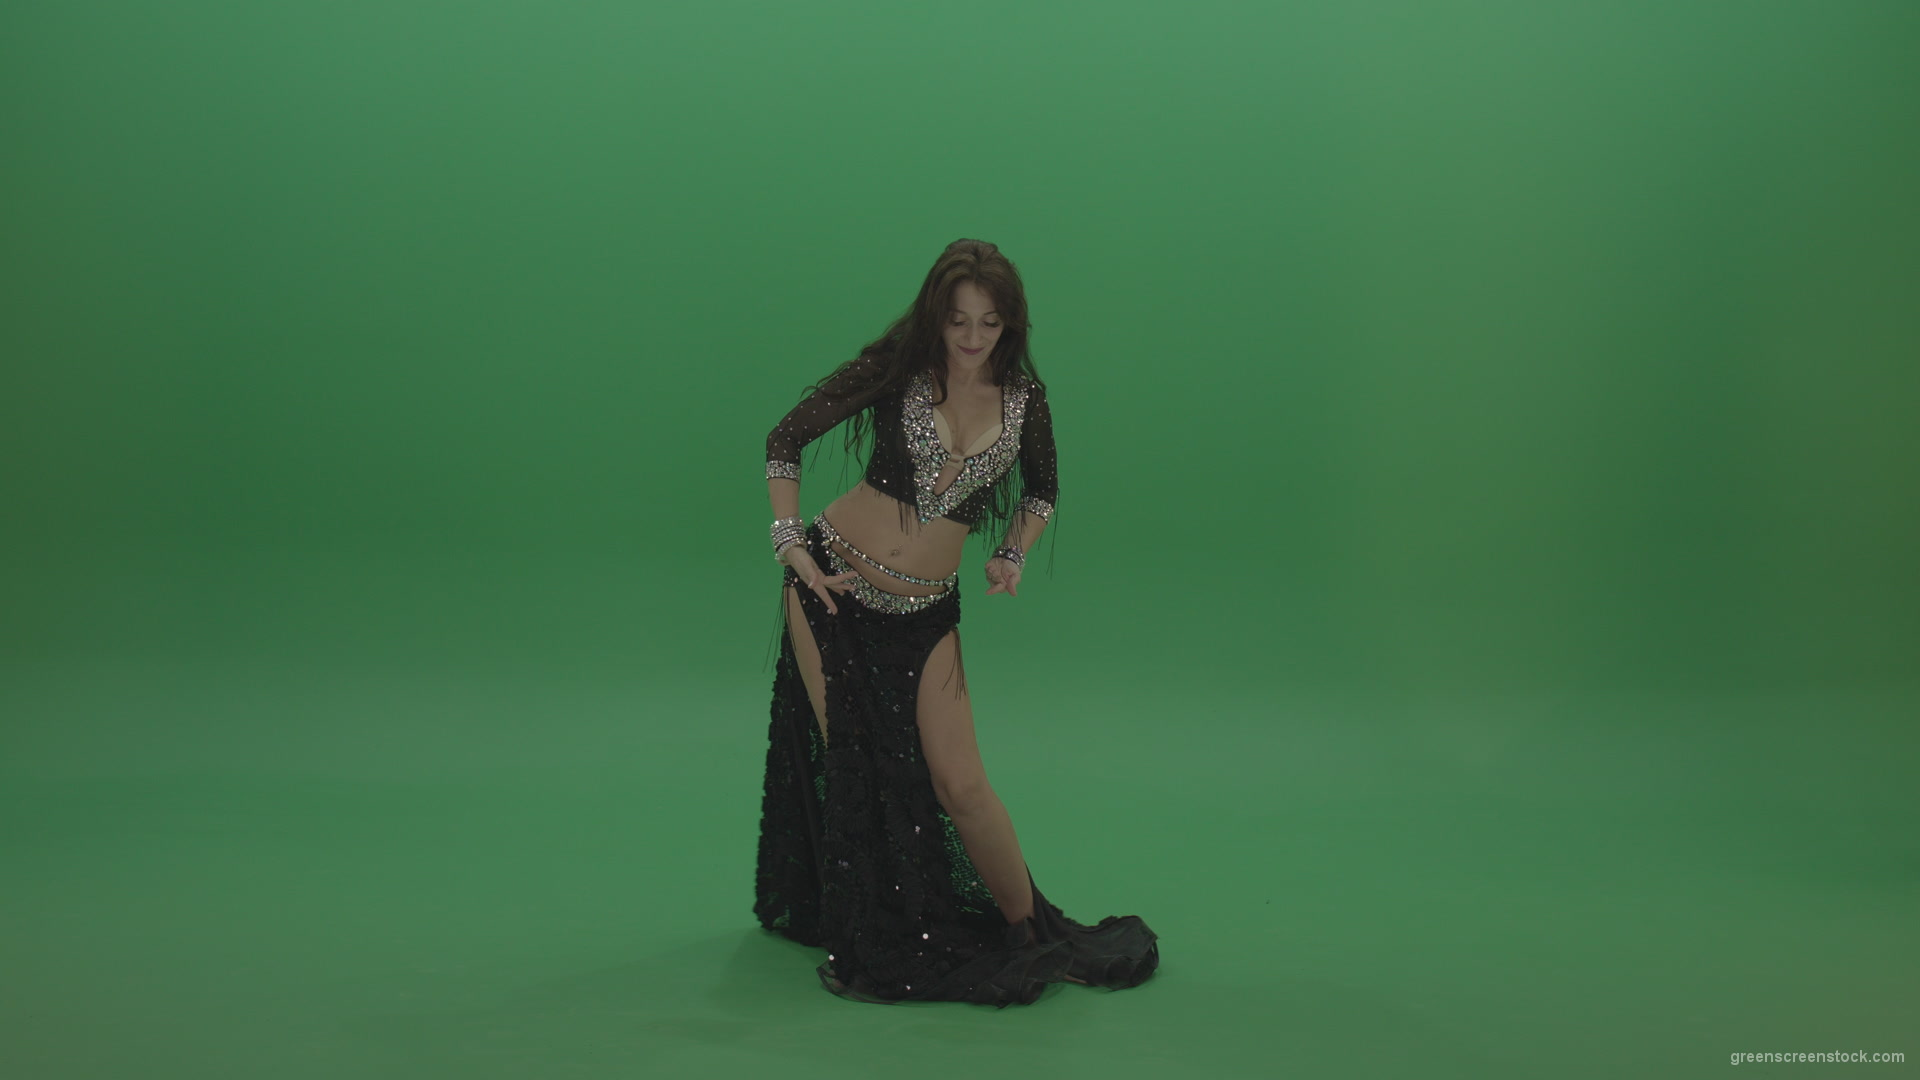 Admirable-belly-dancer-in-black-wear-display-amazing-dance-moves-over-chromakey-background_005 Green Screen Stock